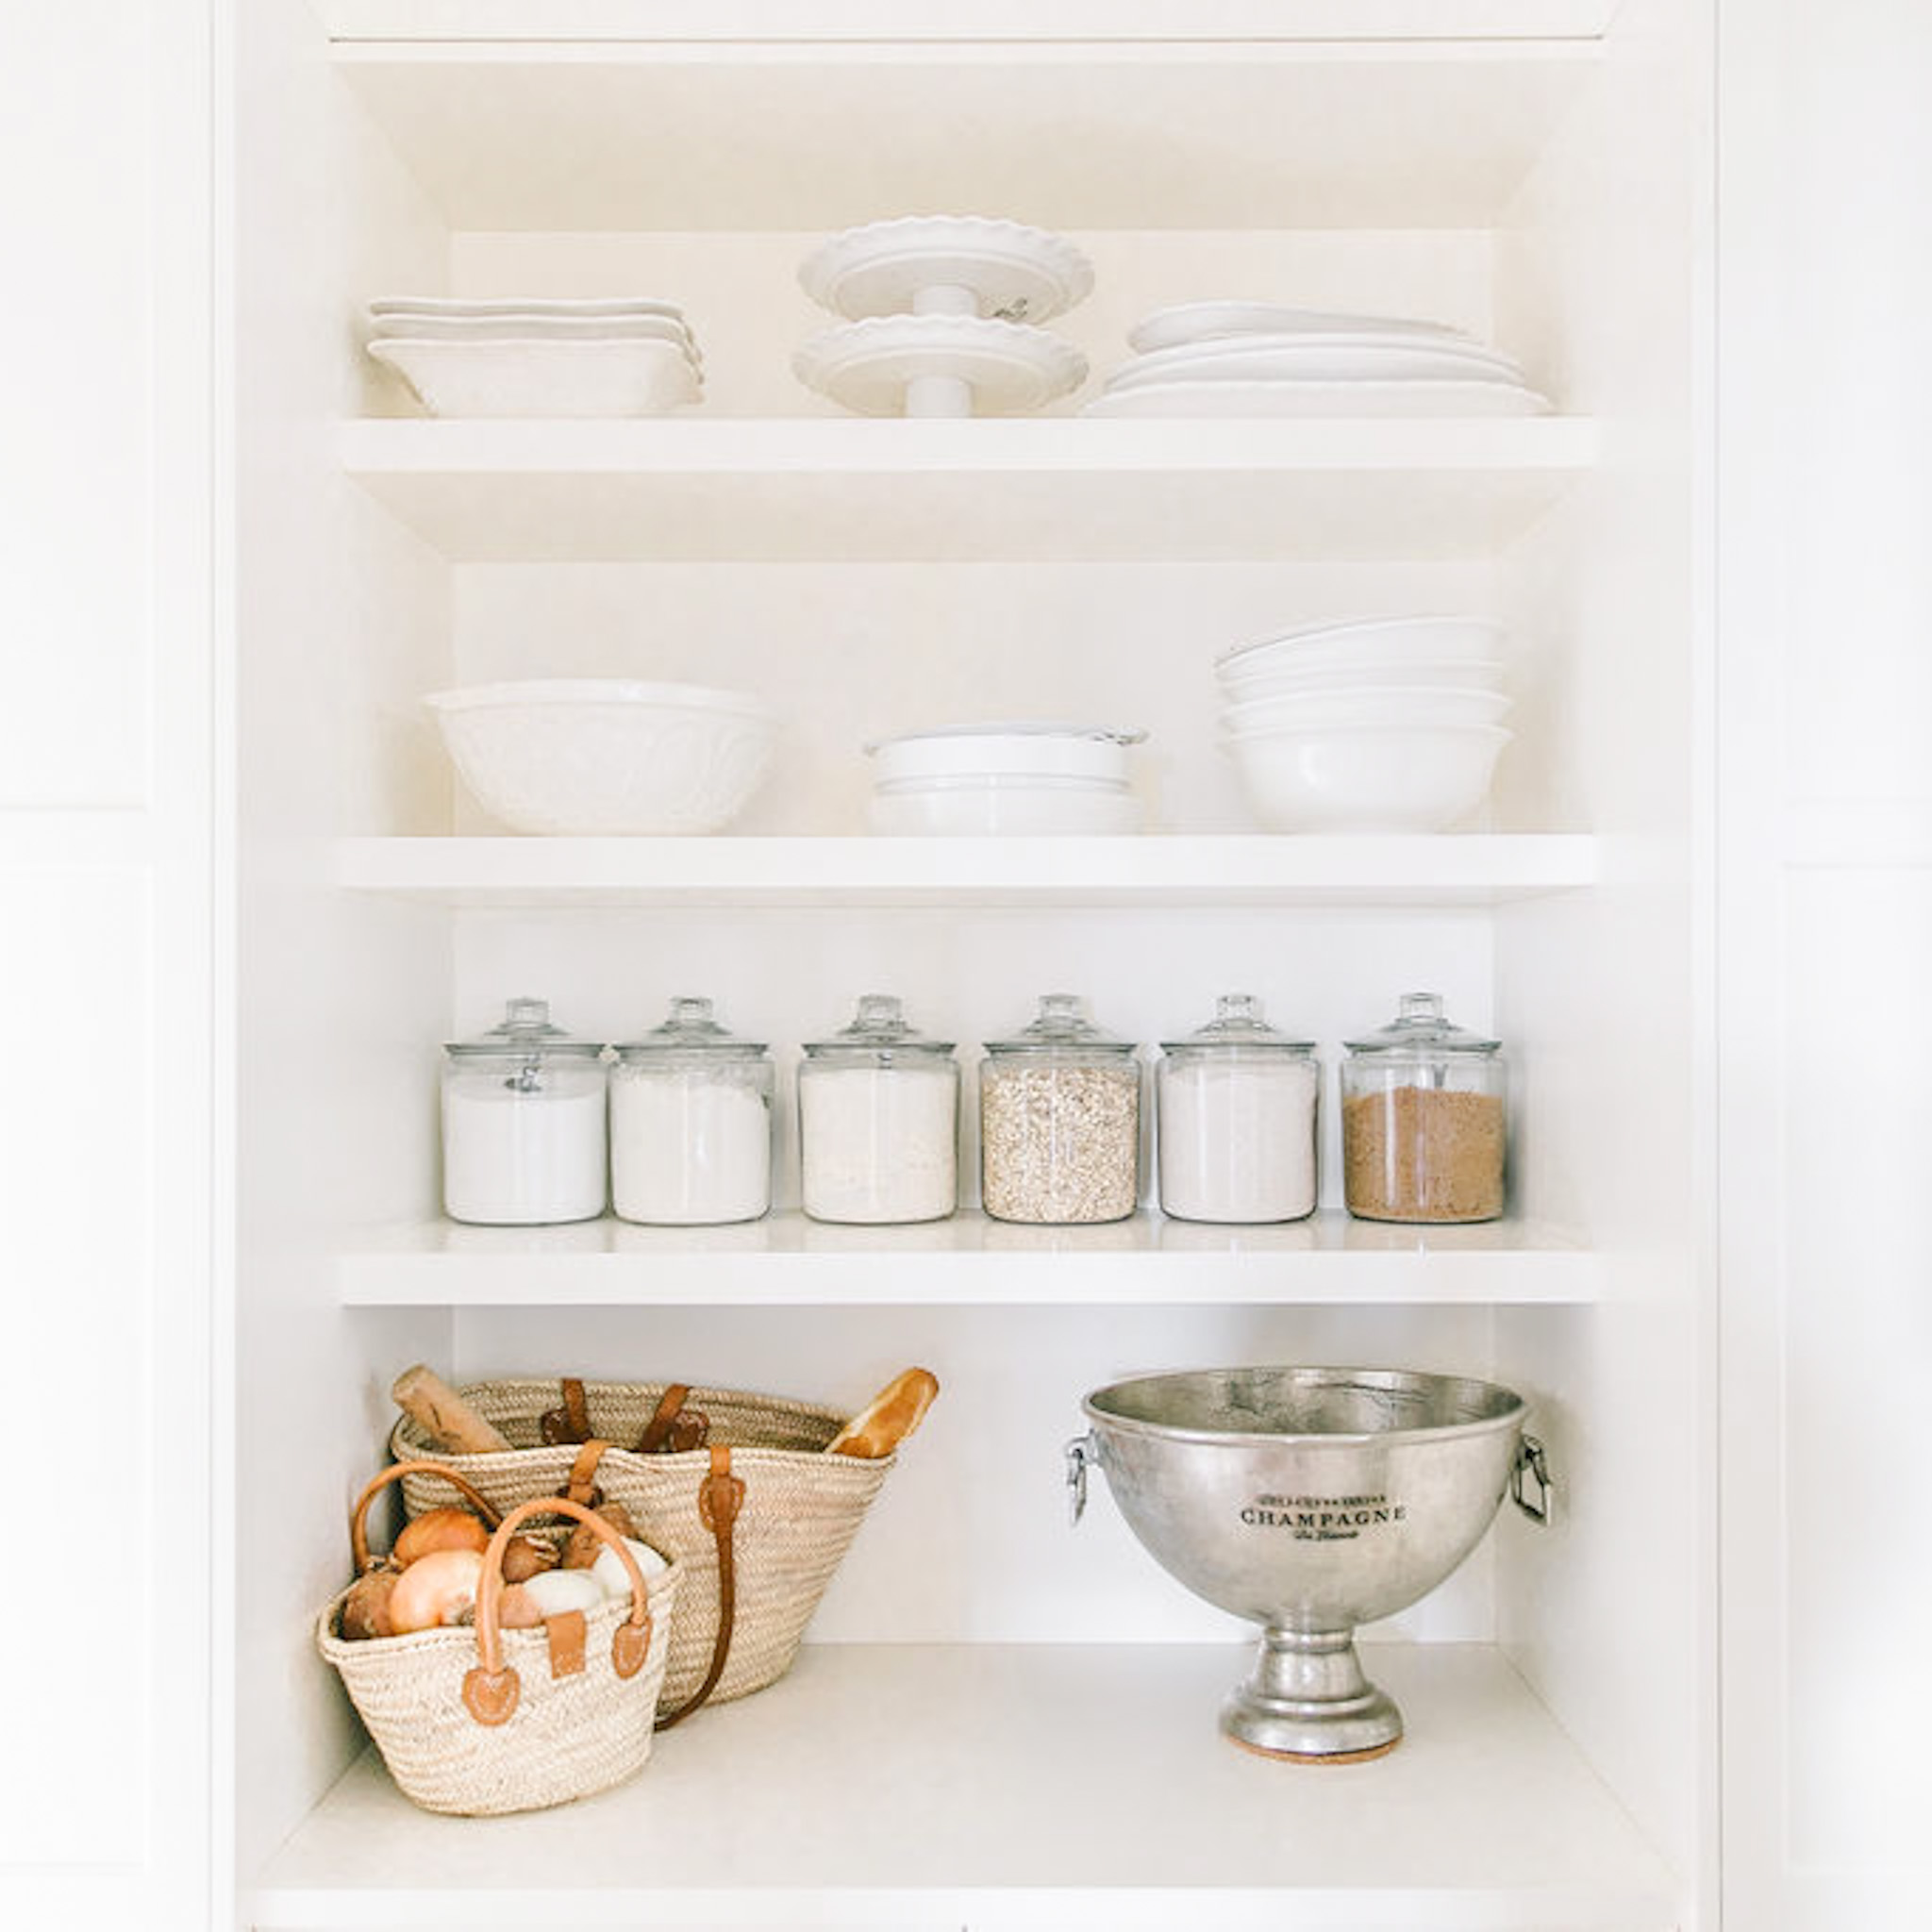 Spring Refresh Pantry Overhaul - Fitty Foodlicious